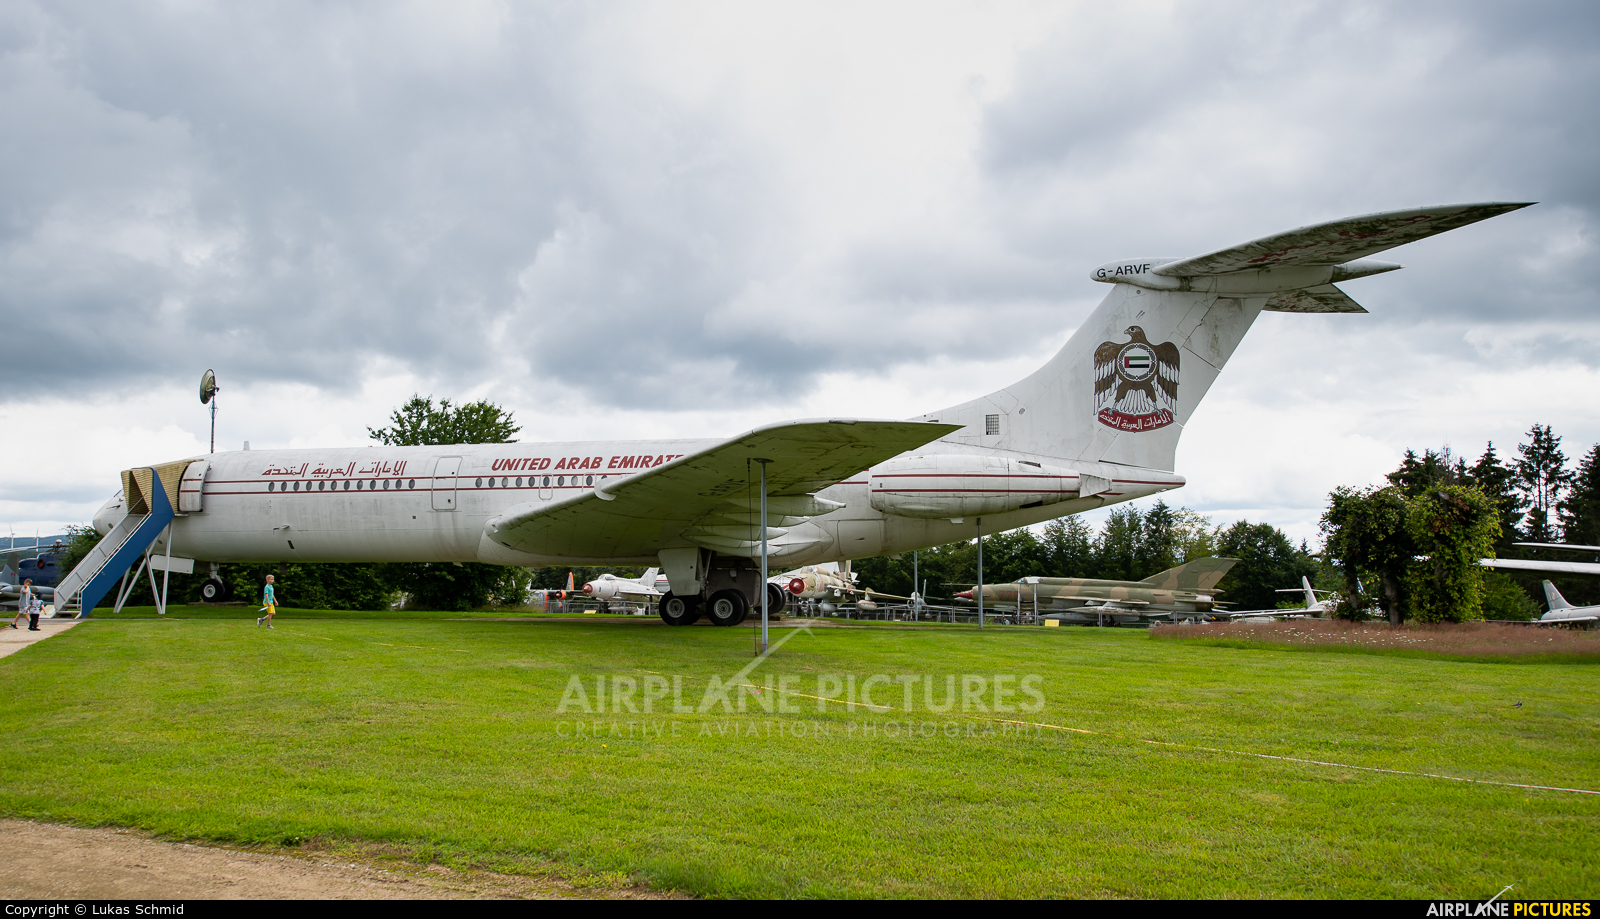 United Arab Emirates - Government G-ARVF aircraft at Hermeskeil